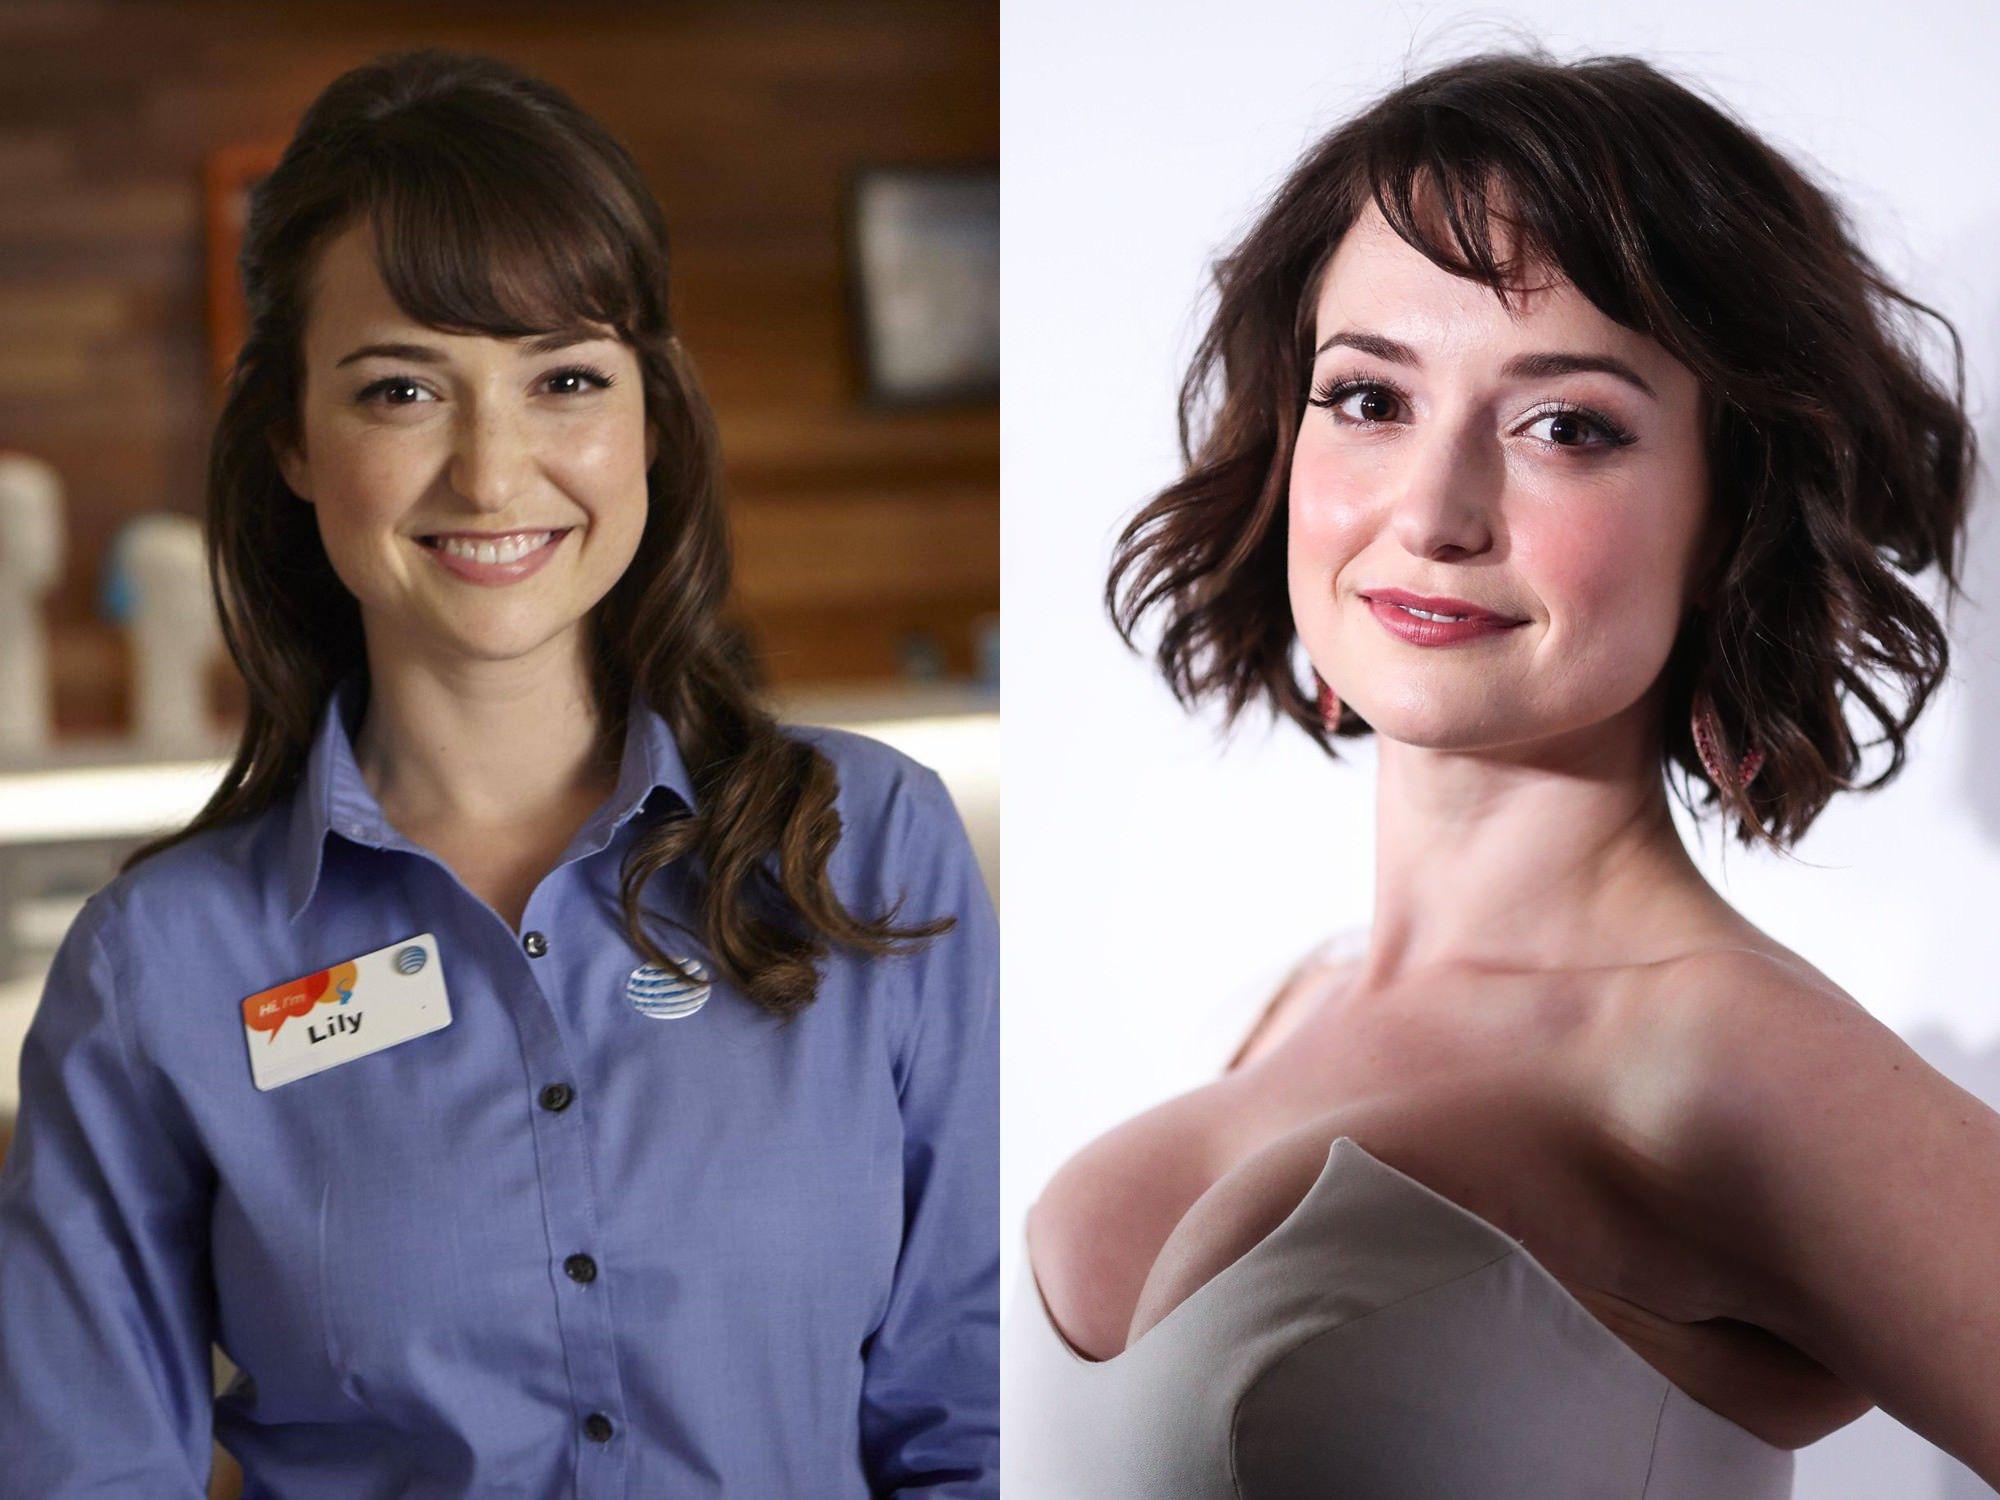 Shoutout to Milana Vayntrub for one of the best revelations in recent memory